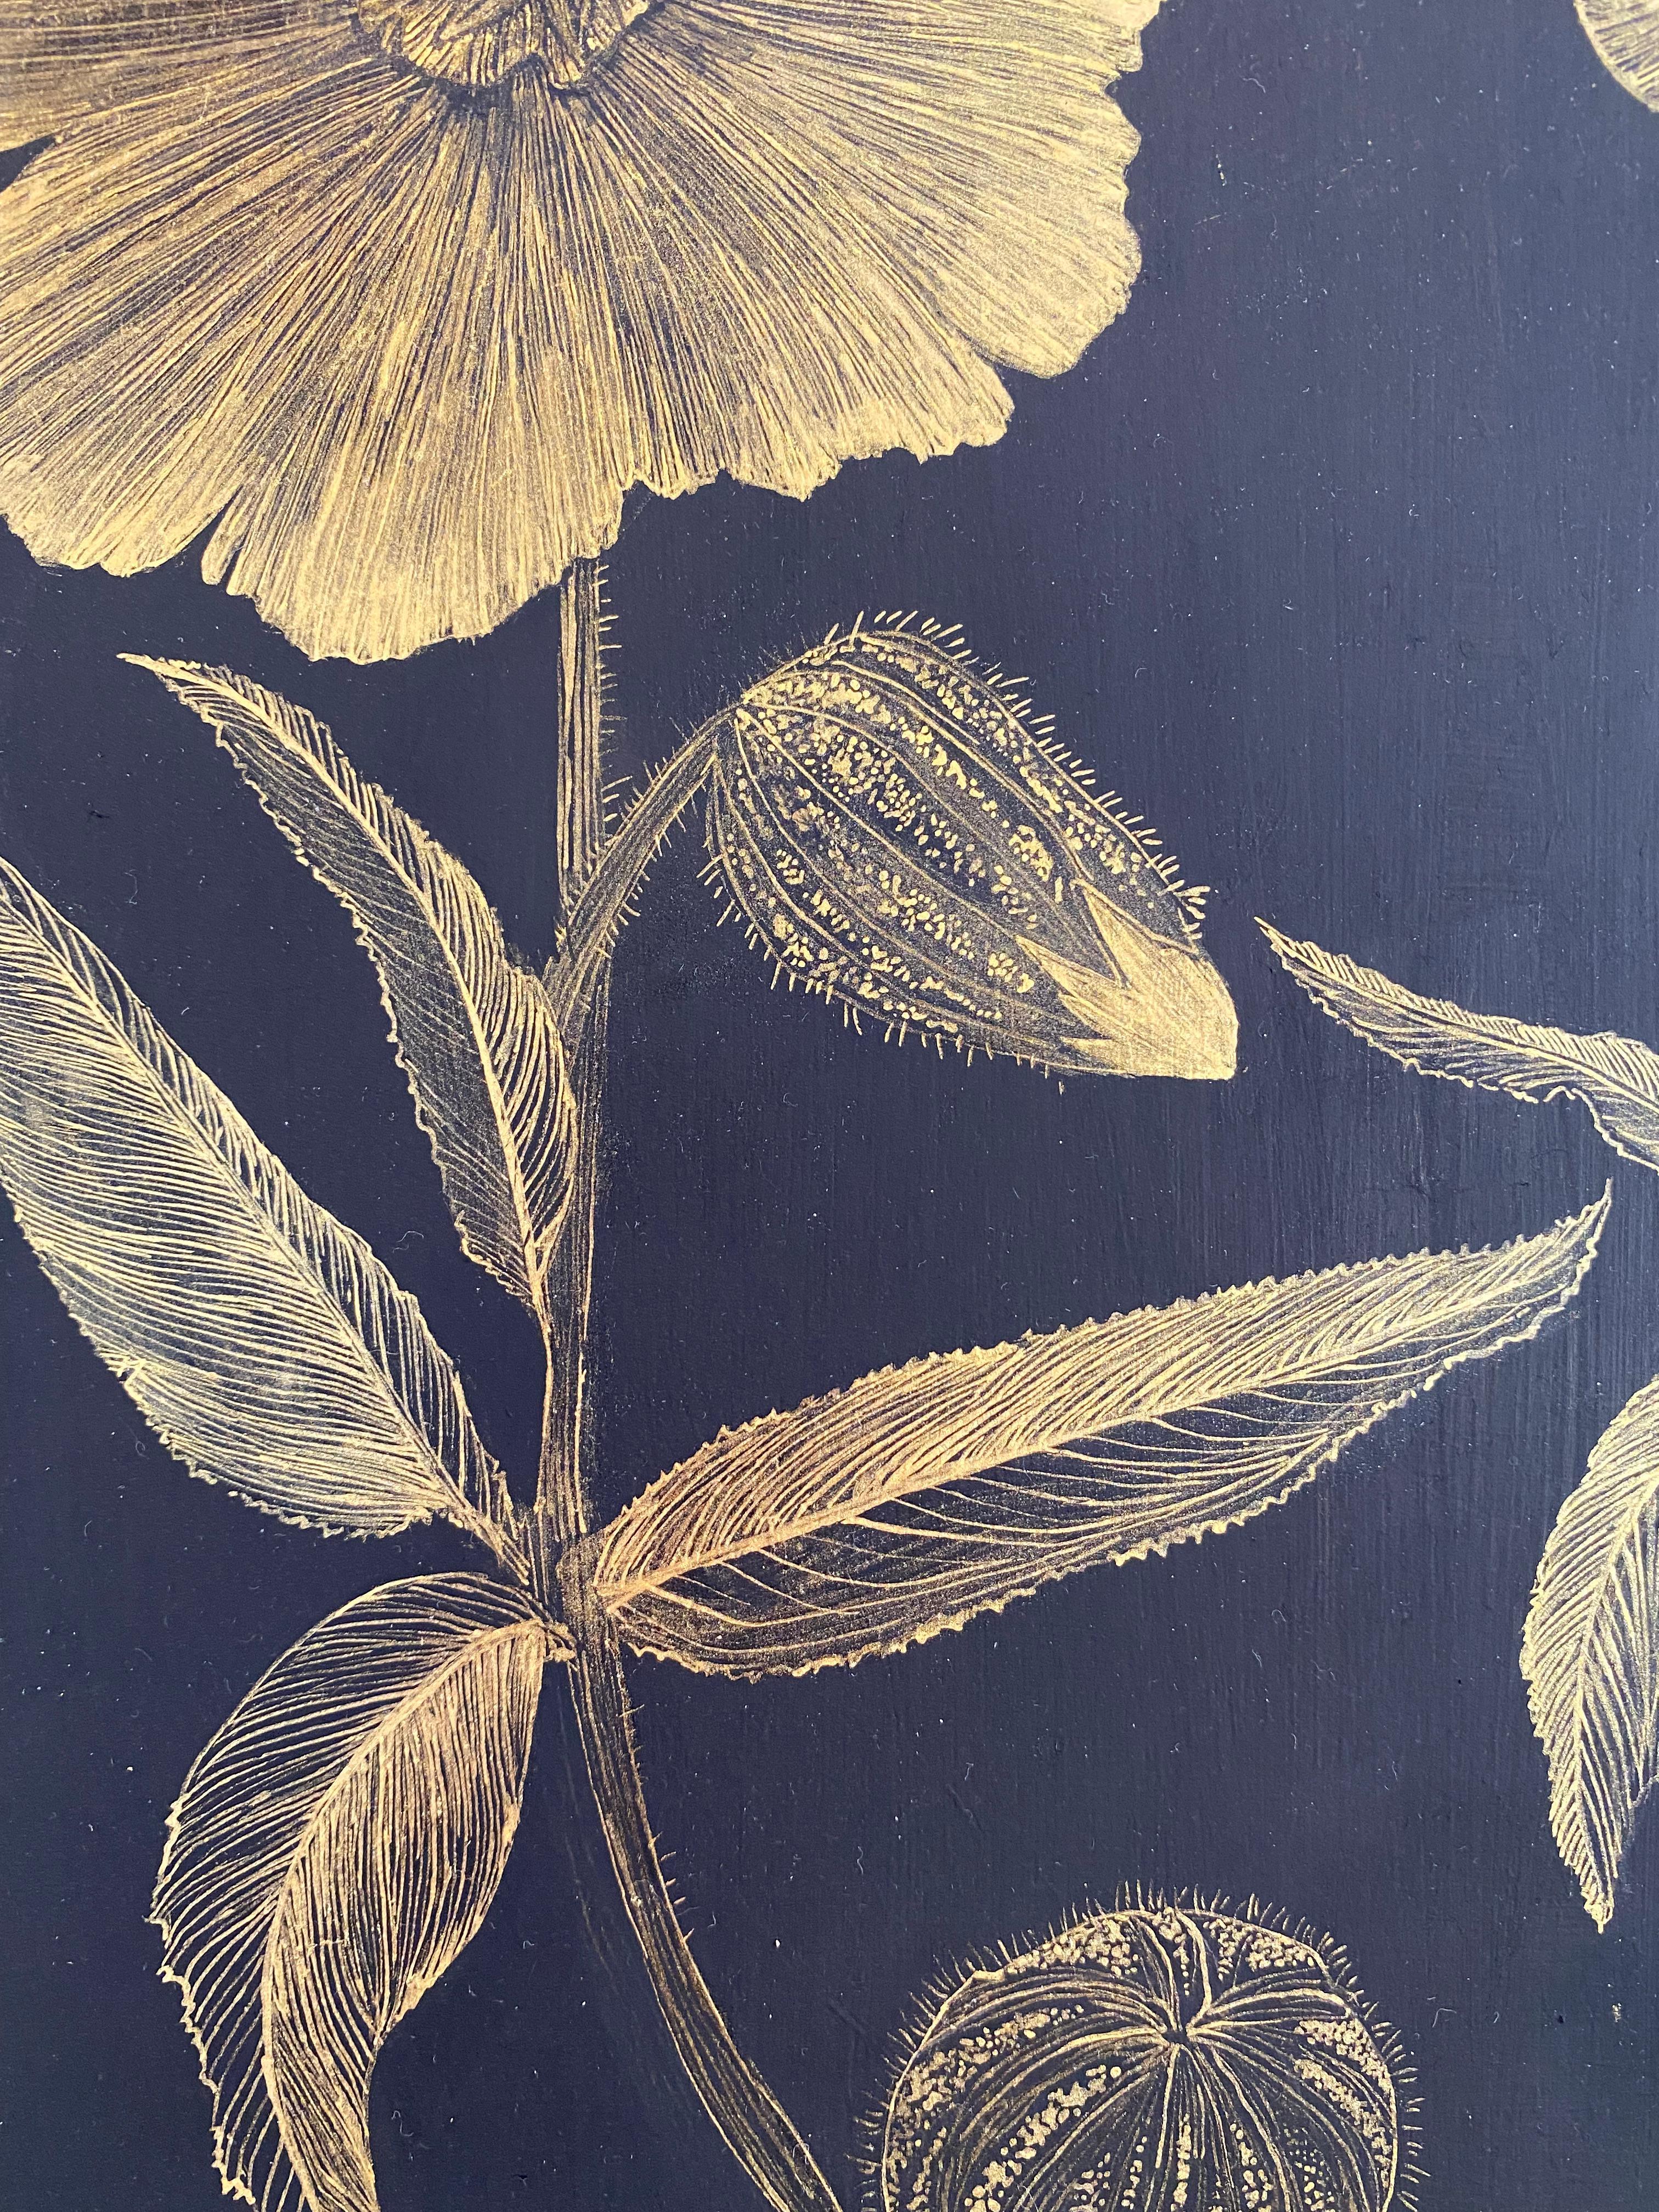 Marshmallow Two, Gold Flowers, Leaves Stem, Metallic Botanical Painting on Black For Sale 7